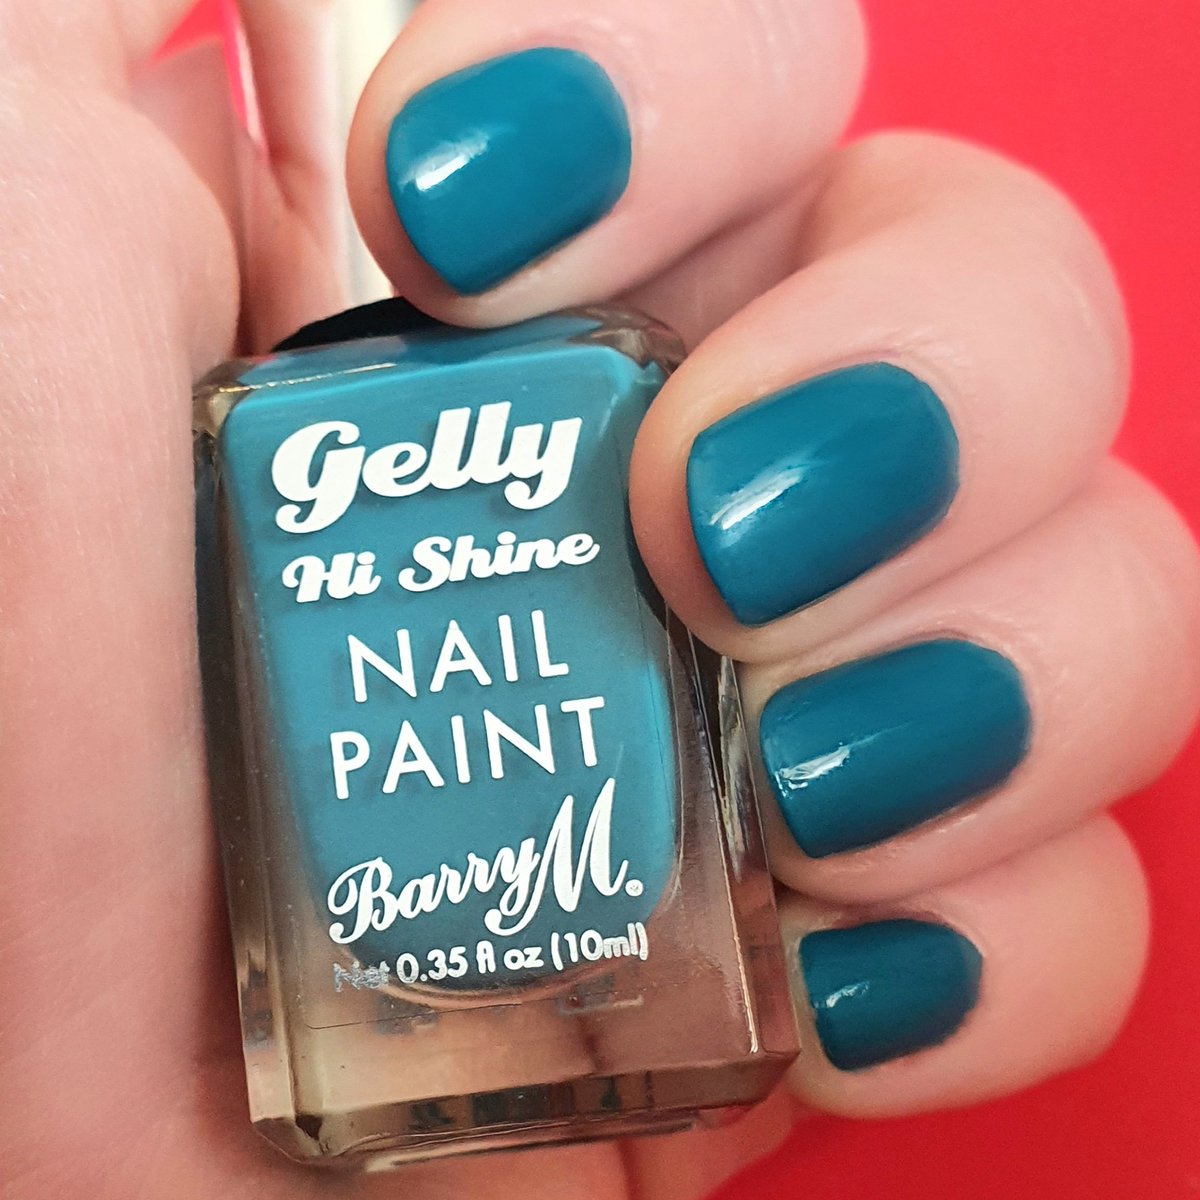 Loving this colour for the summer! #barrymcosmetics #makeup #nails